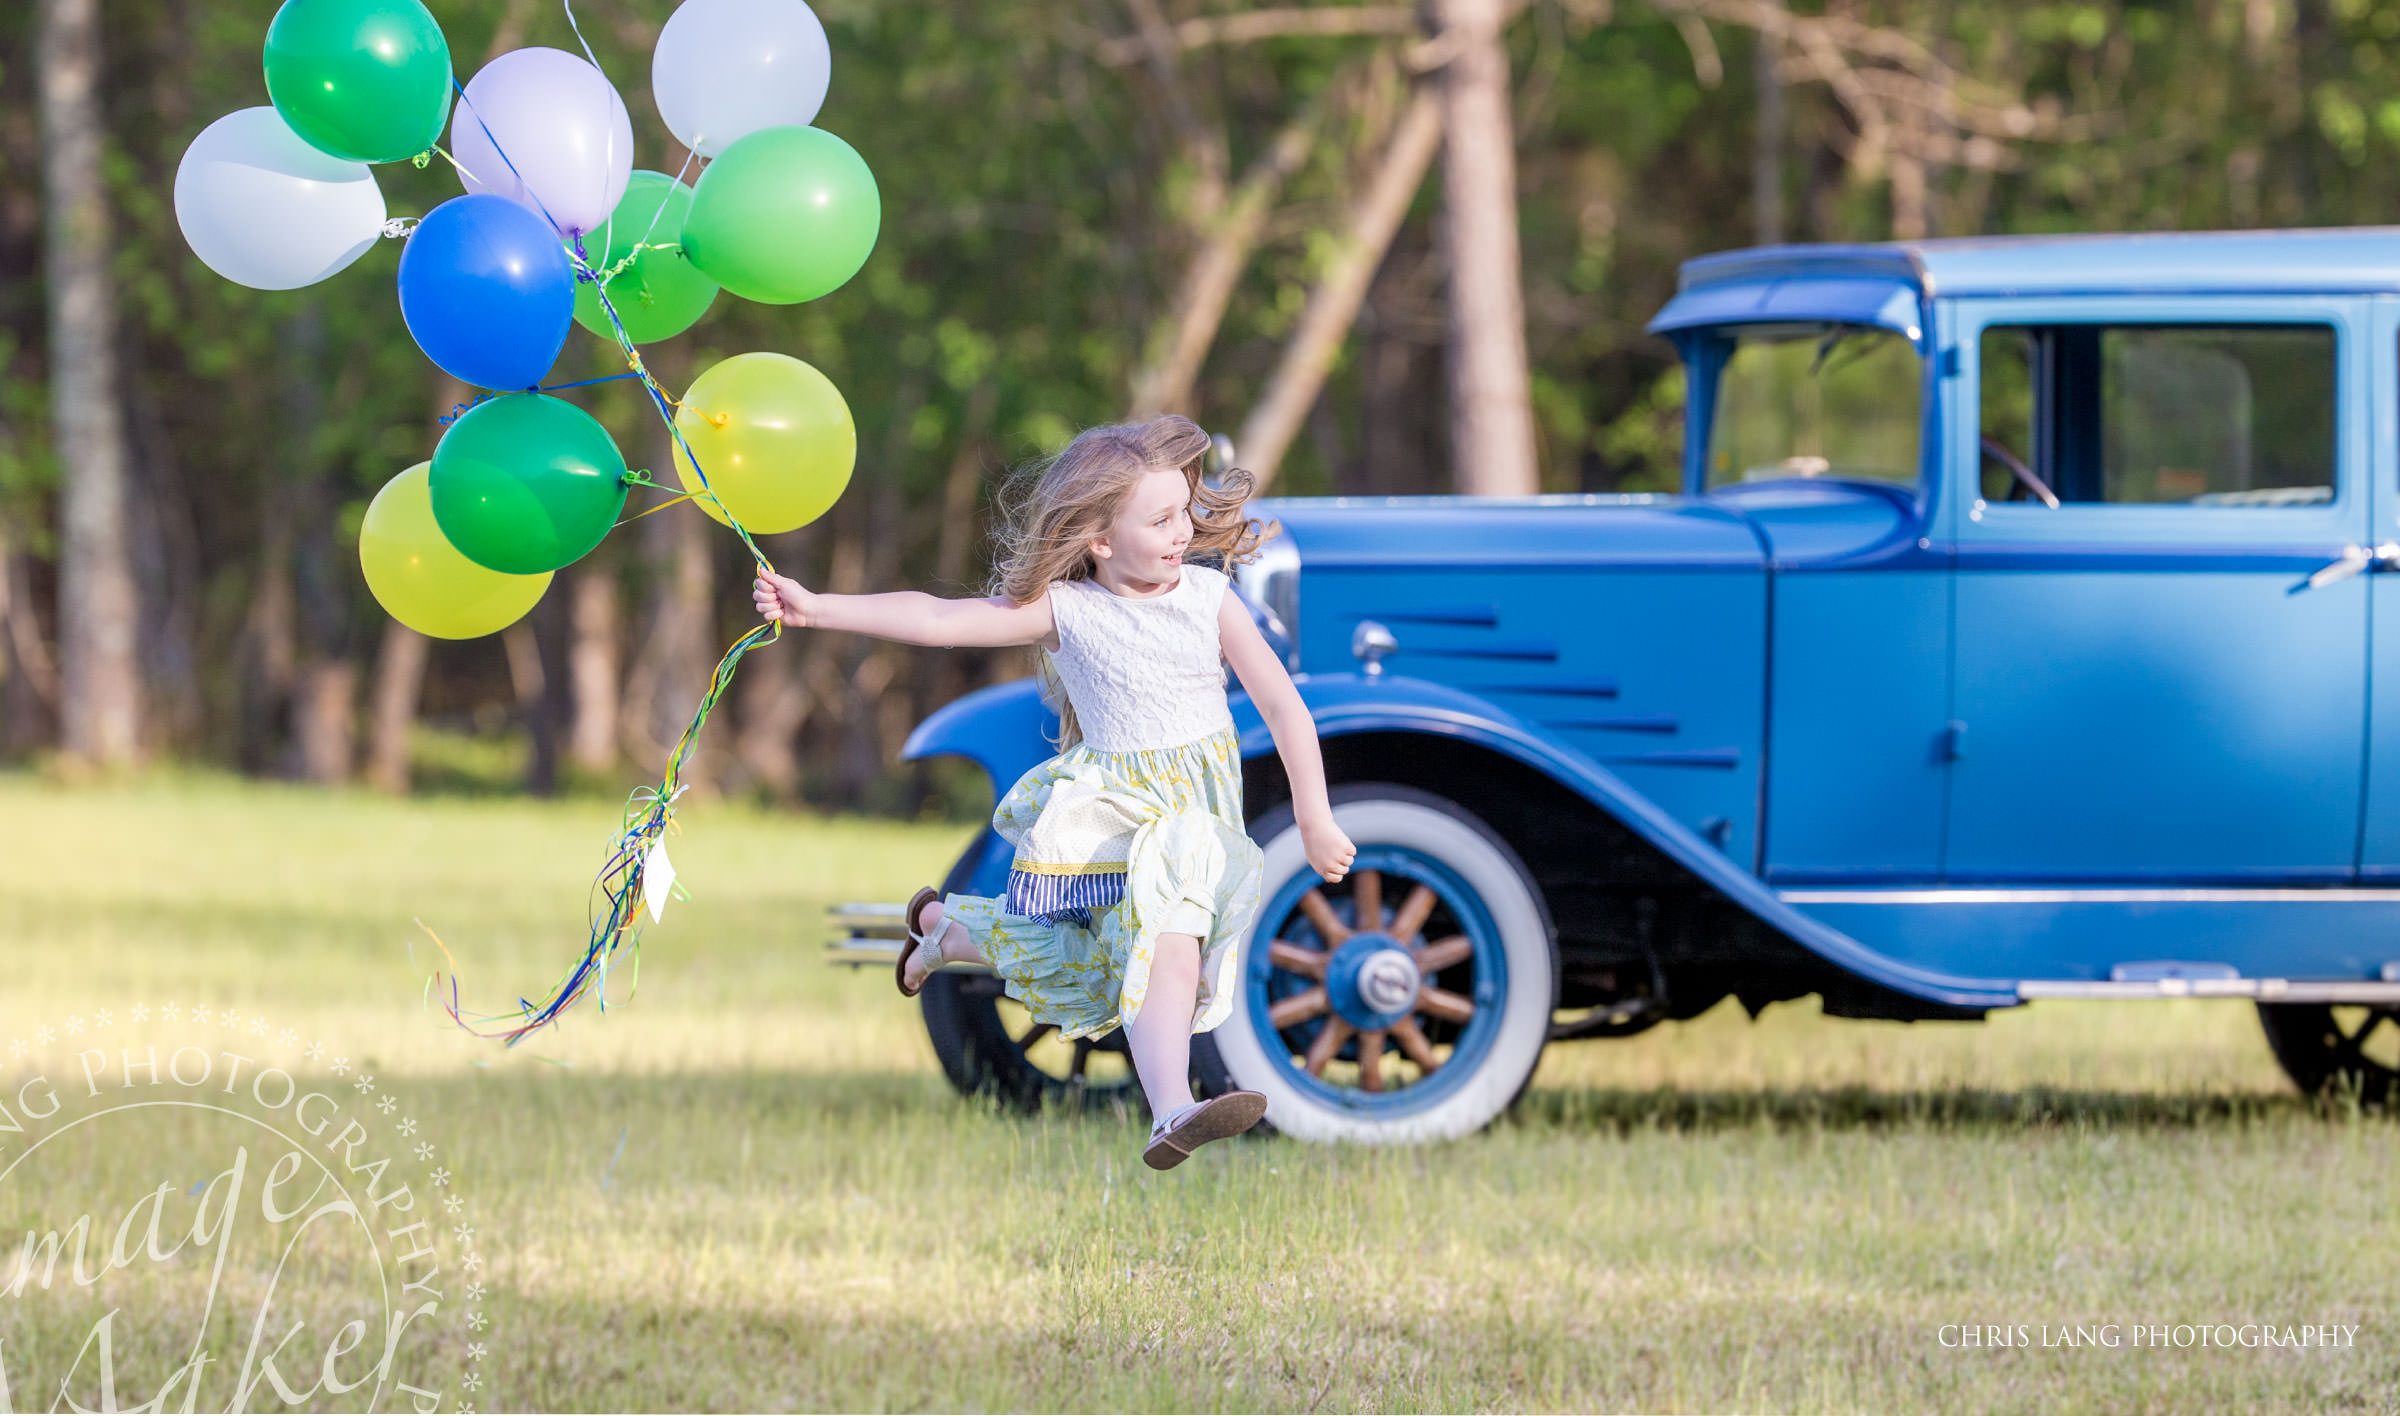 Wilmington NC Family Photographer - Family Photo - Lifestyle family photography - girl - sun dress - balloons - vintage car - little girl rungin & jumping in the air with ballons   - Family photo - family picture